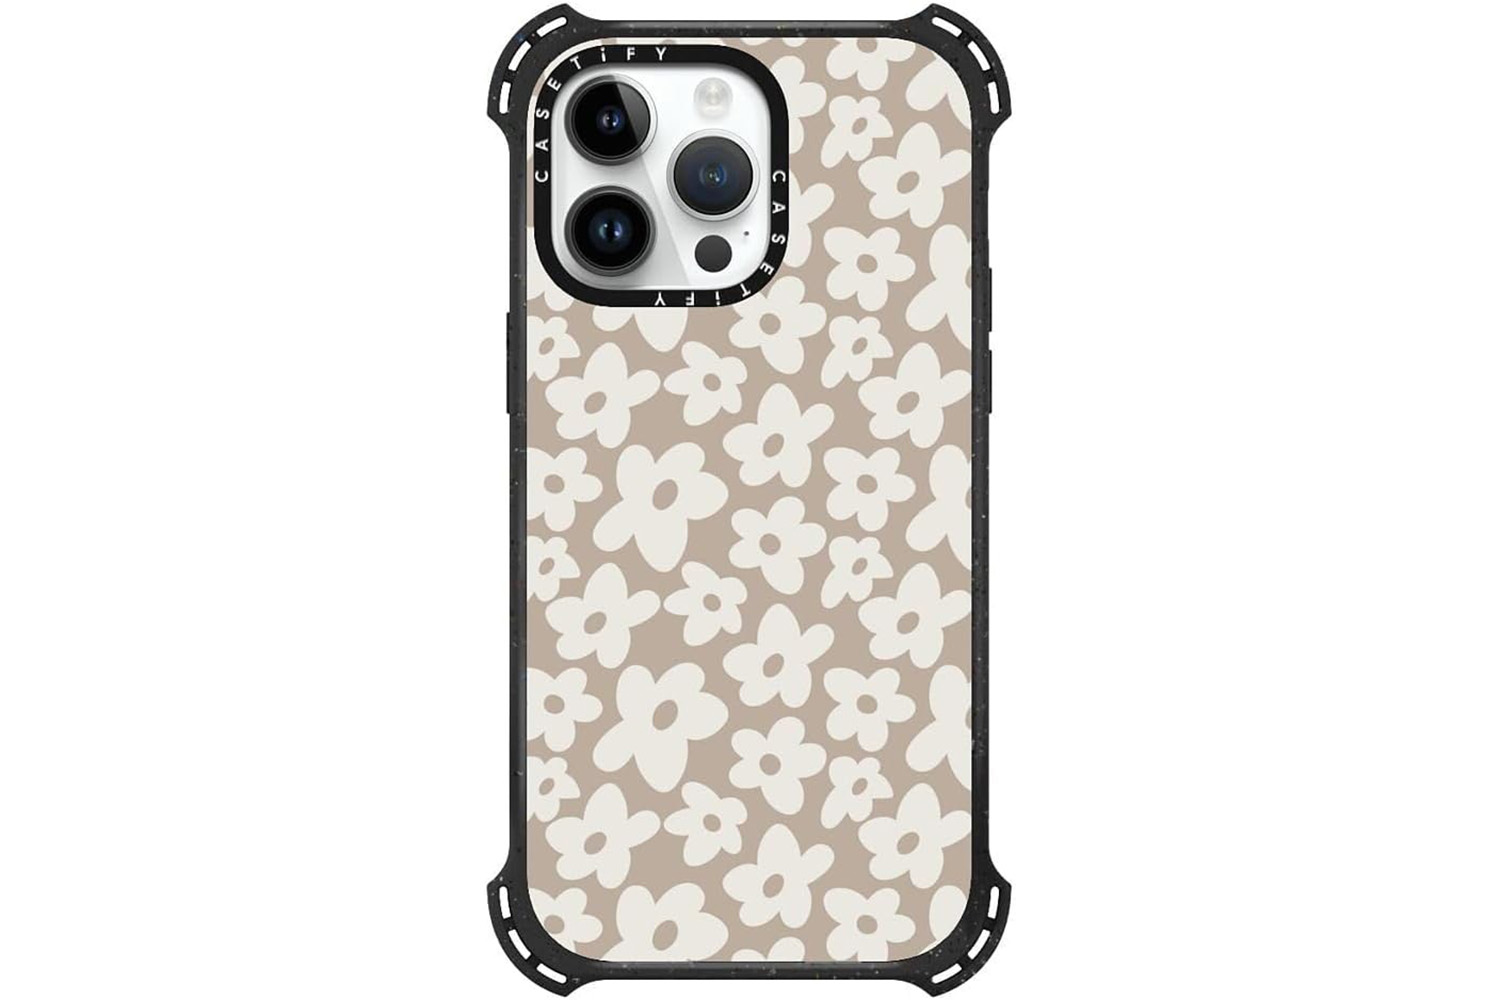 Mobile Covers For iPhone 12 Pro With Unique Designs, Patterns And Themes -  Times of India